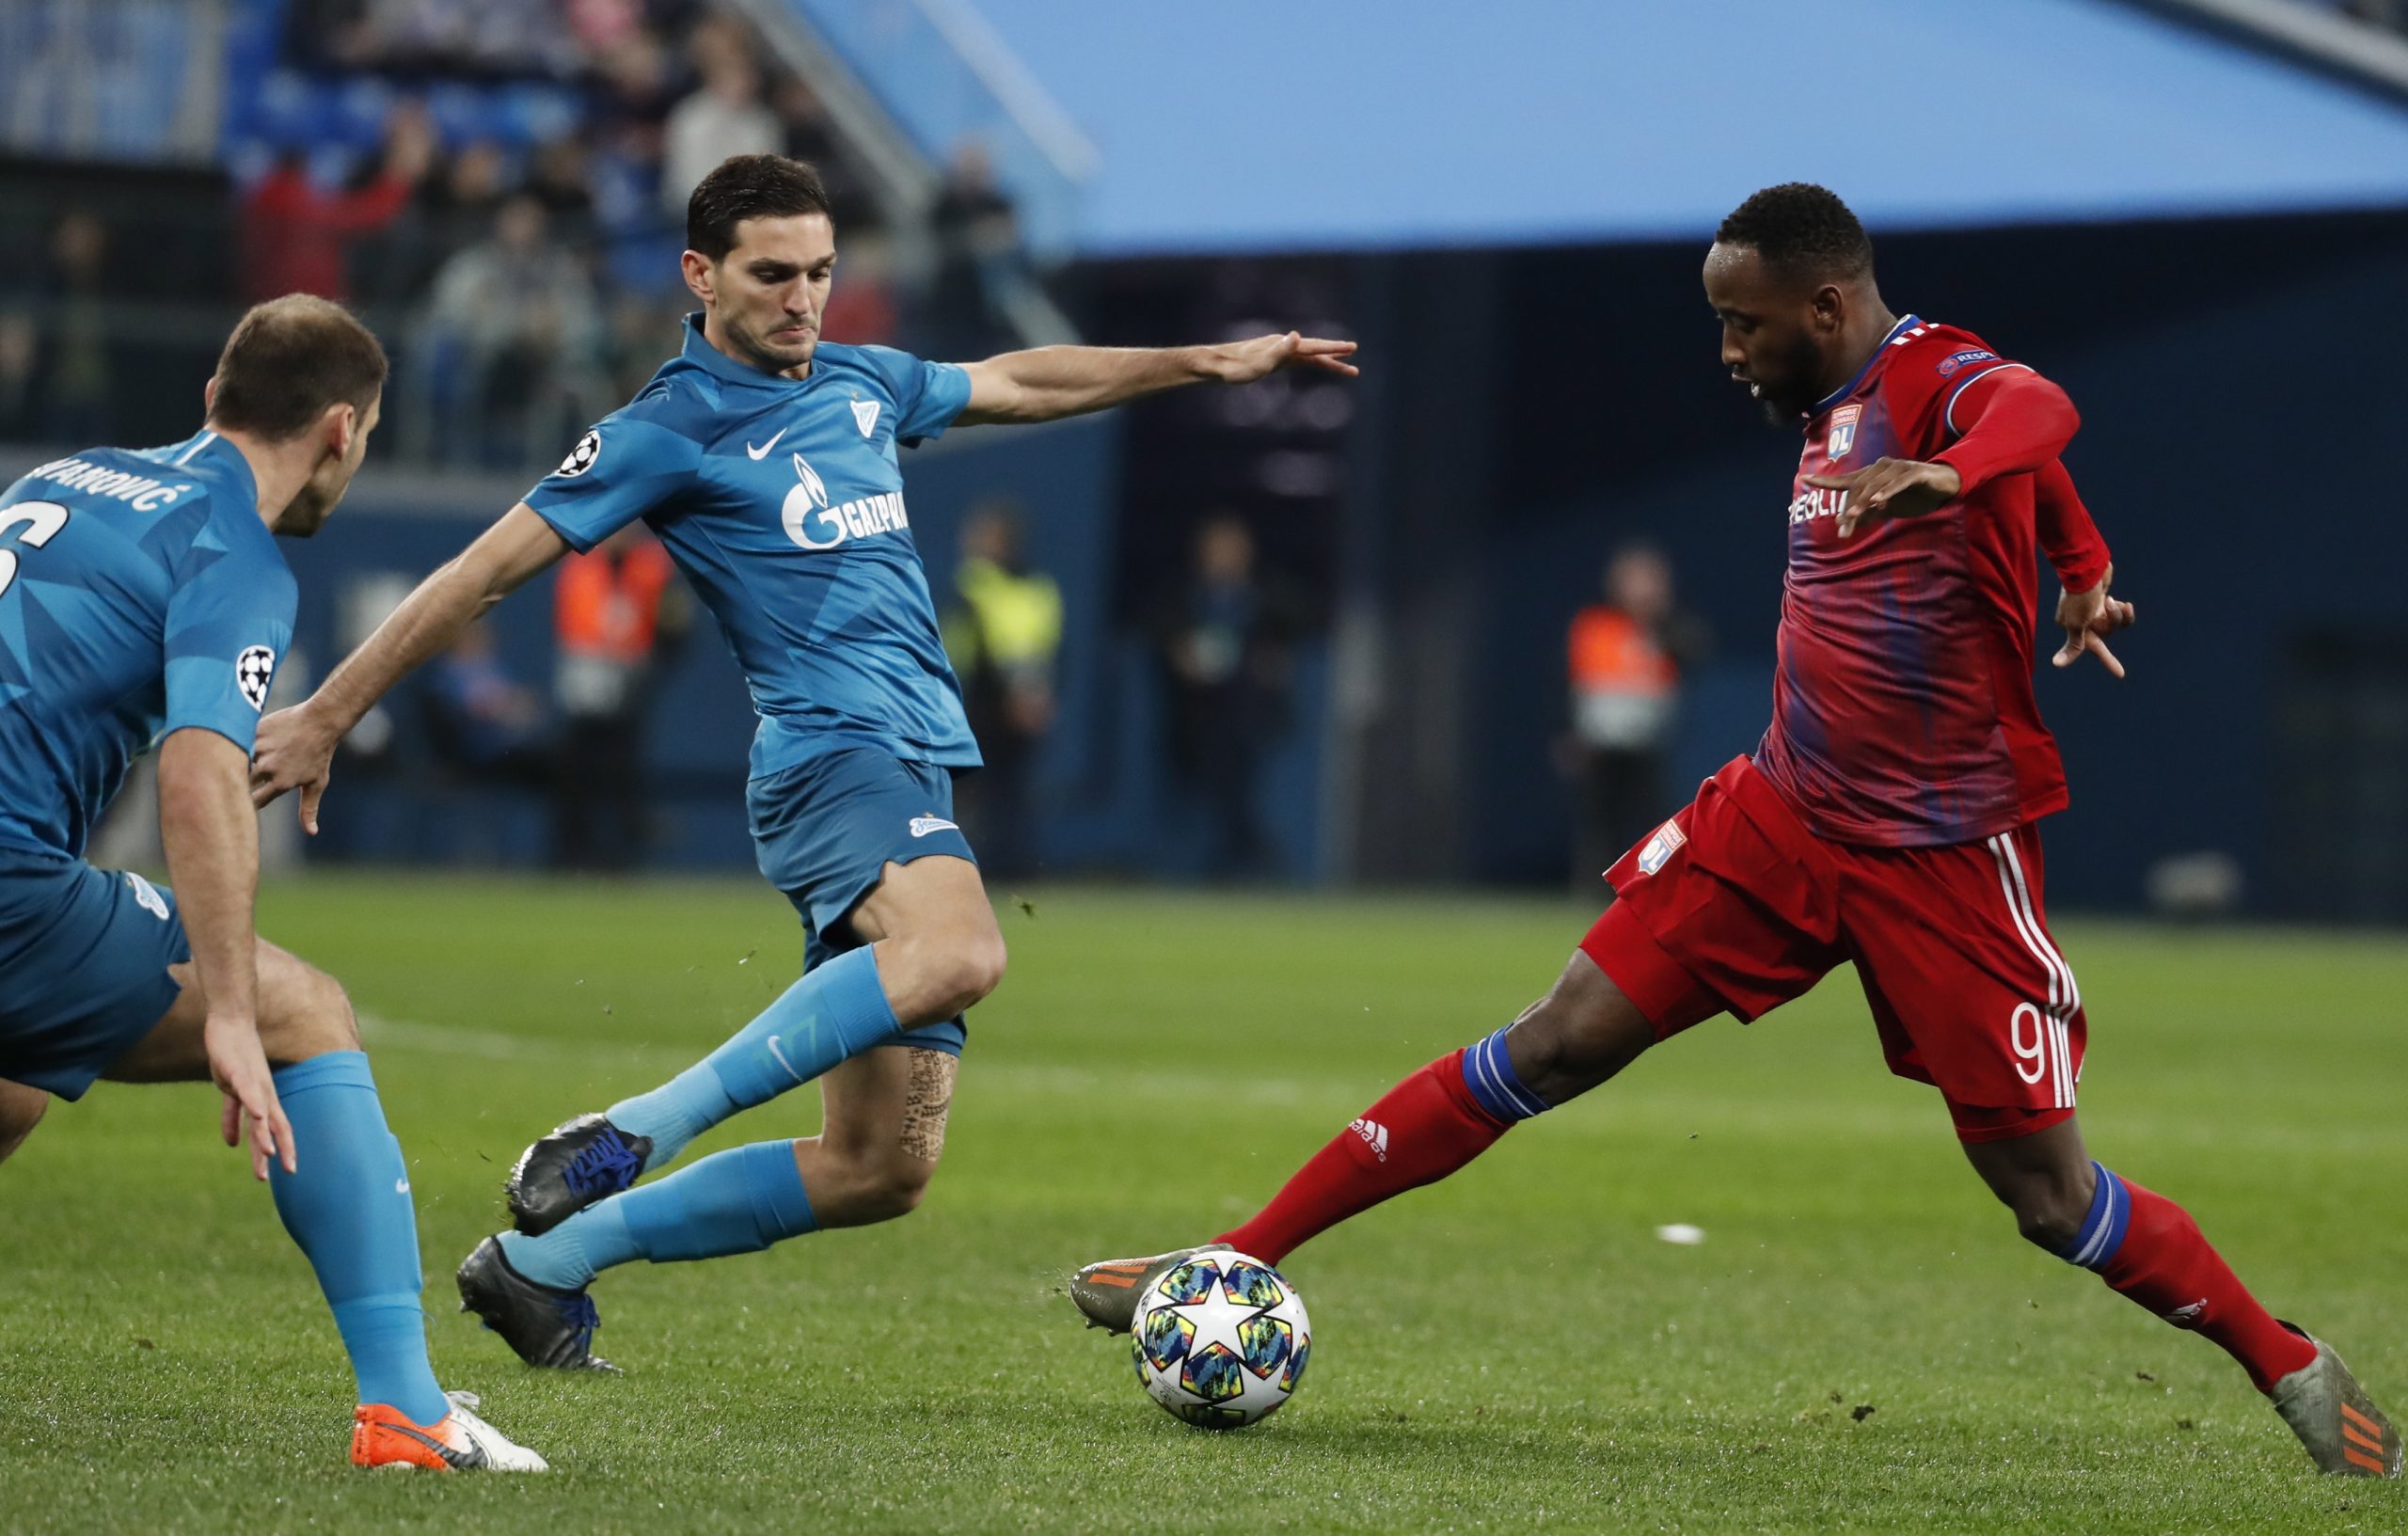 epa08029434 Magomed Ozdoev (C) of Zenit and Moussa Dembele of Lyon (R) in action during the UEFA Champions League group G soccer match between Zenit St Petersburg and Olympique Lyon in Saint Petersburg, Russia, 27 November 2019.  EPA/ANATOLY MALTSEV